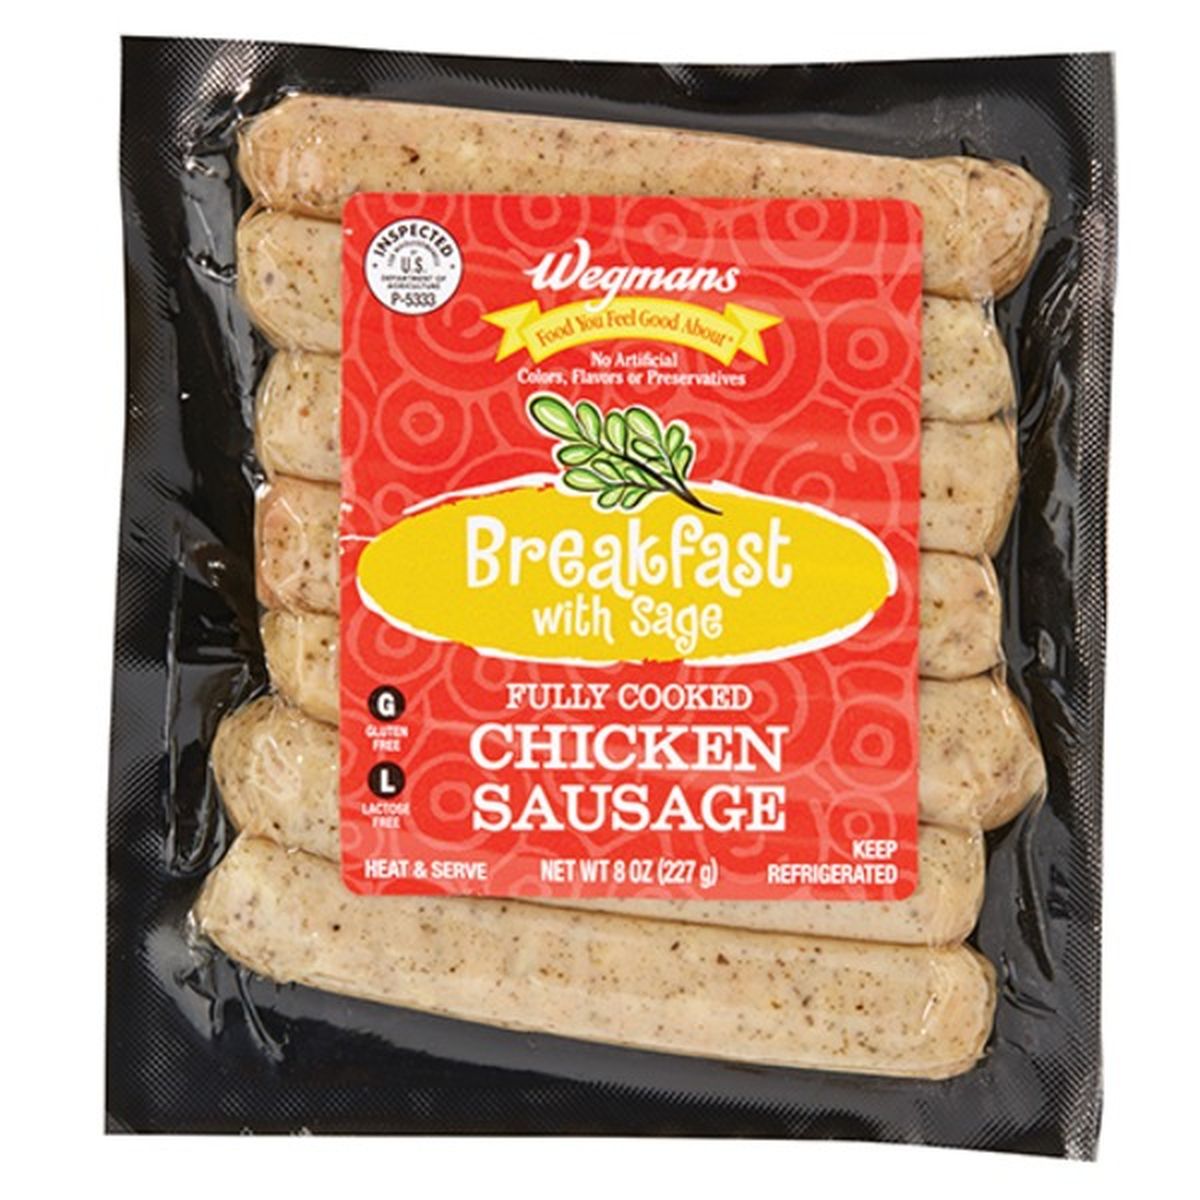 Calories in Wegmans Fully Cooked Breakfast with Sage Chicken Sausage